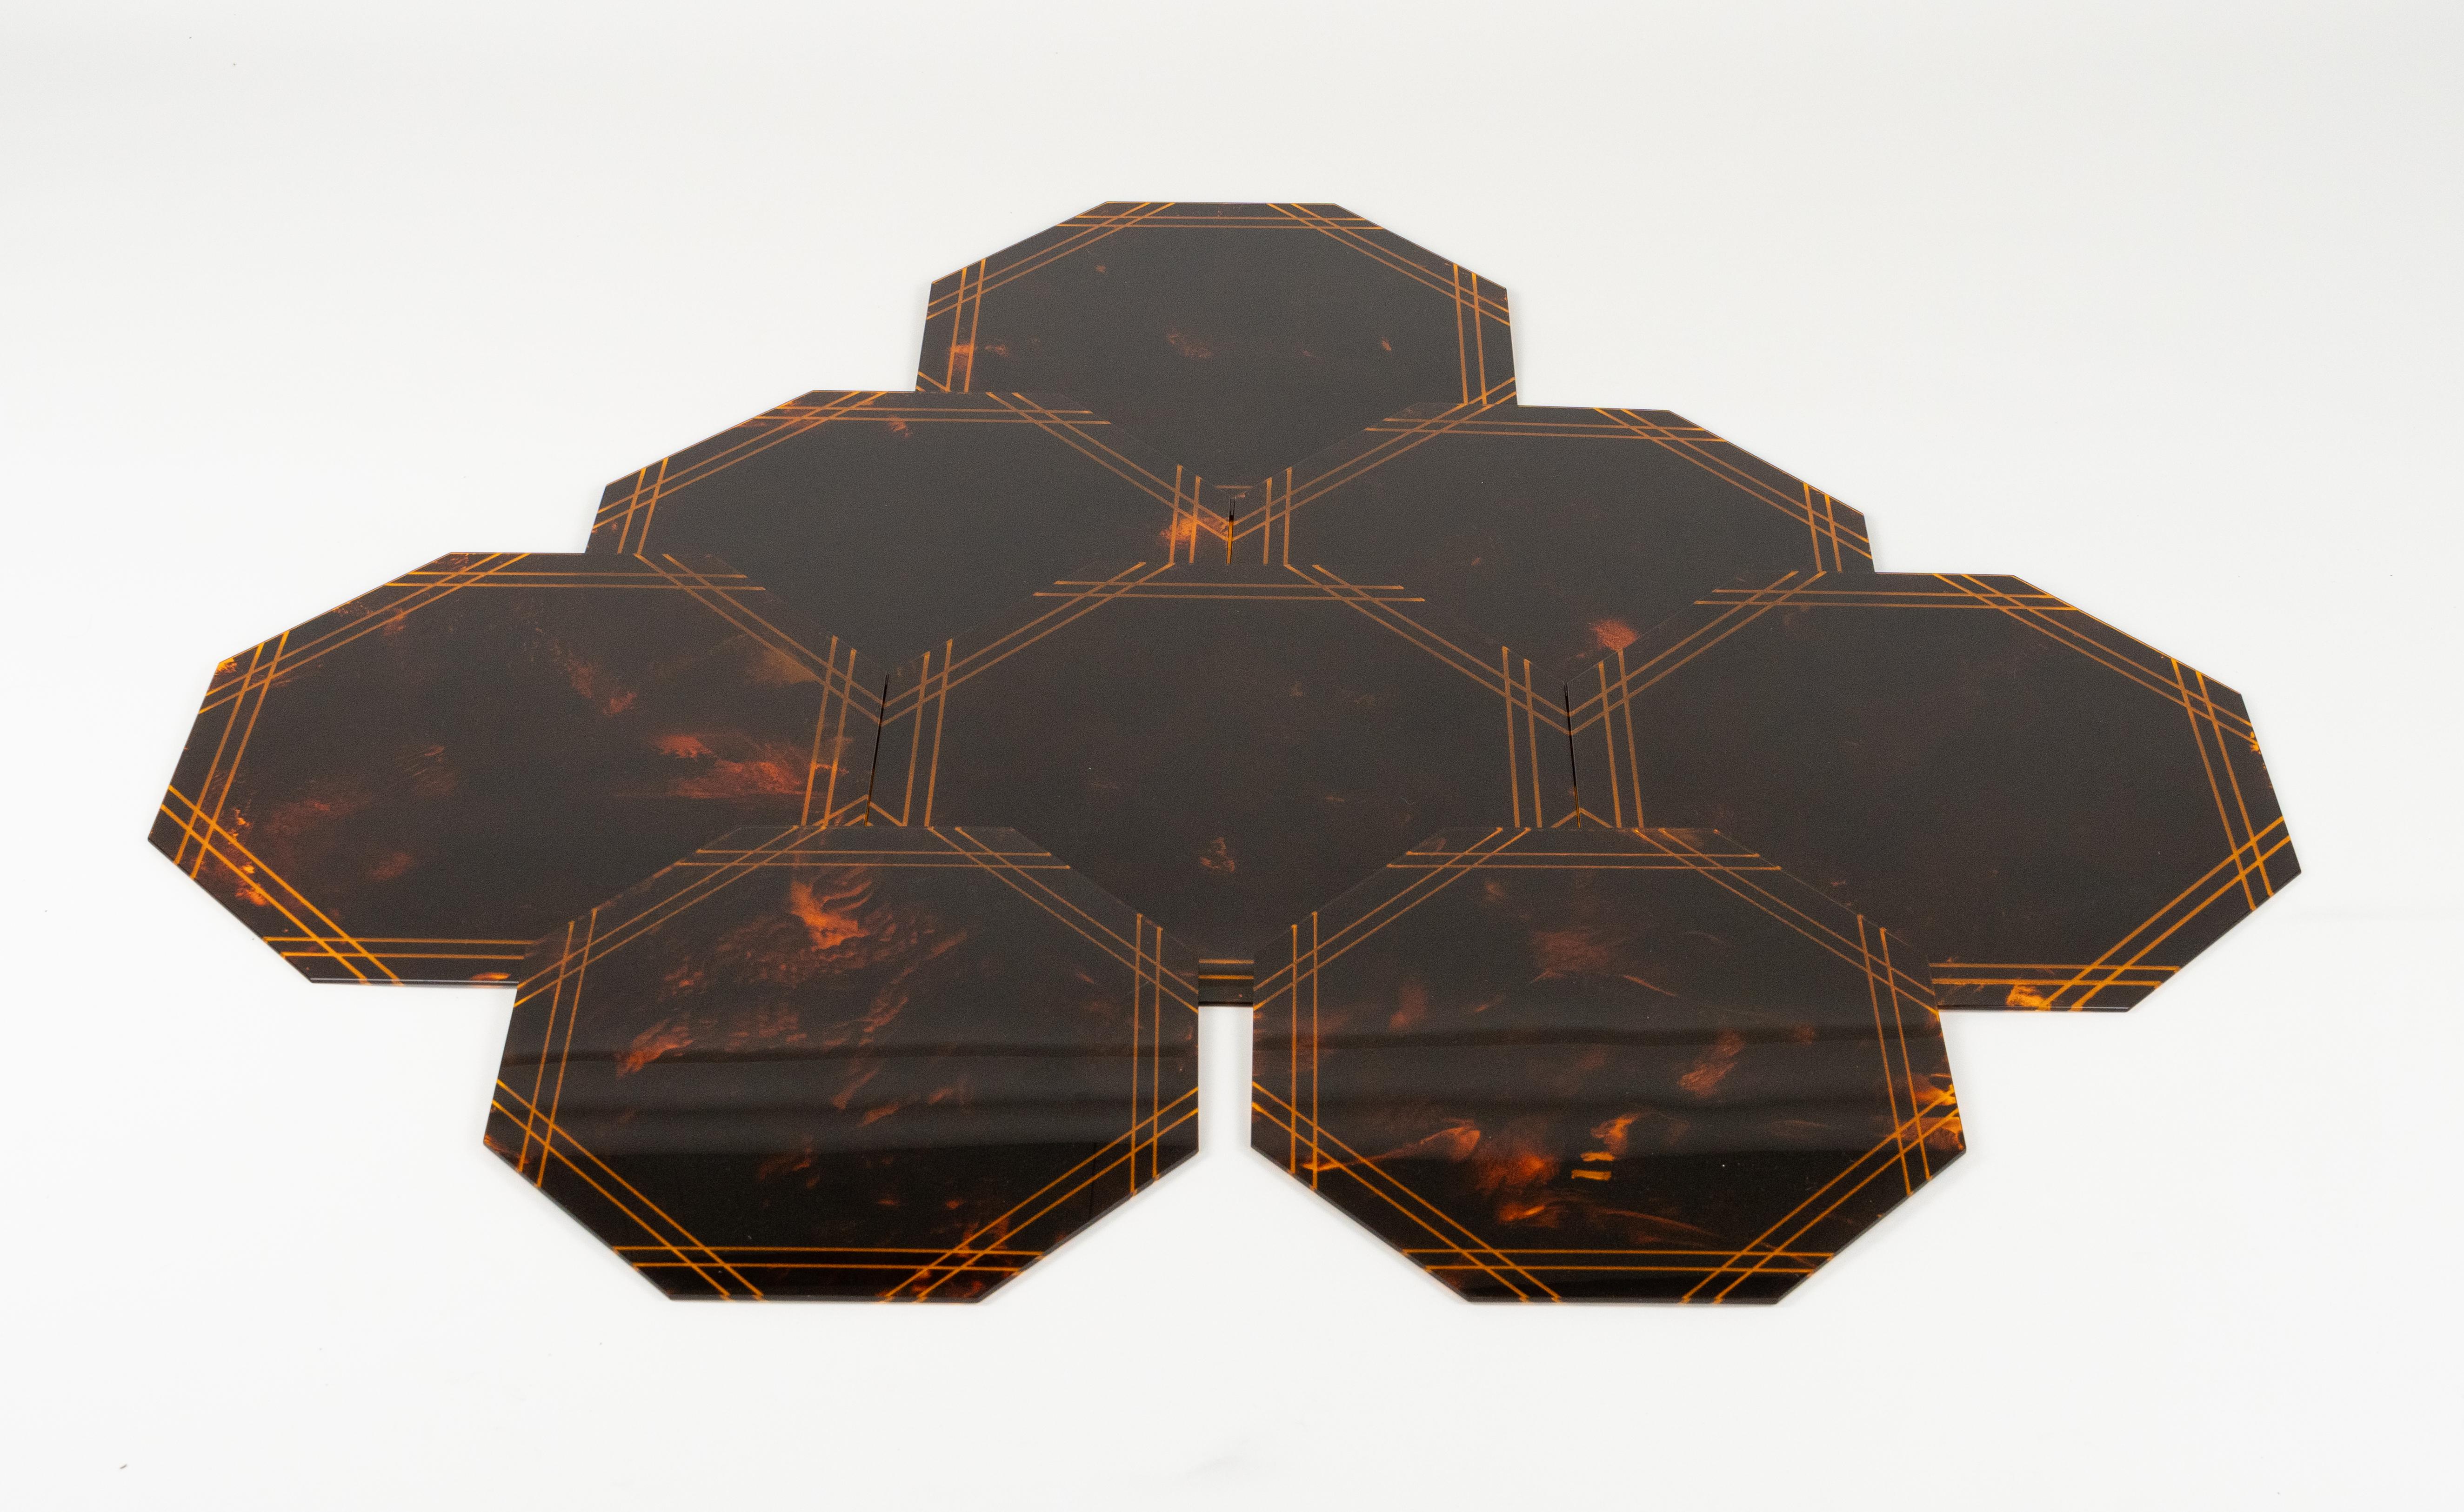 Set of Eight Placemats Tortoiseshell Effect Lucite by Team Guzzini, Italy 1970s For Sale 3